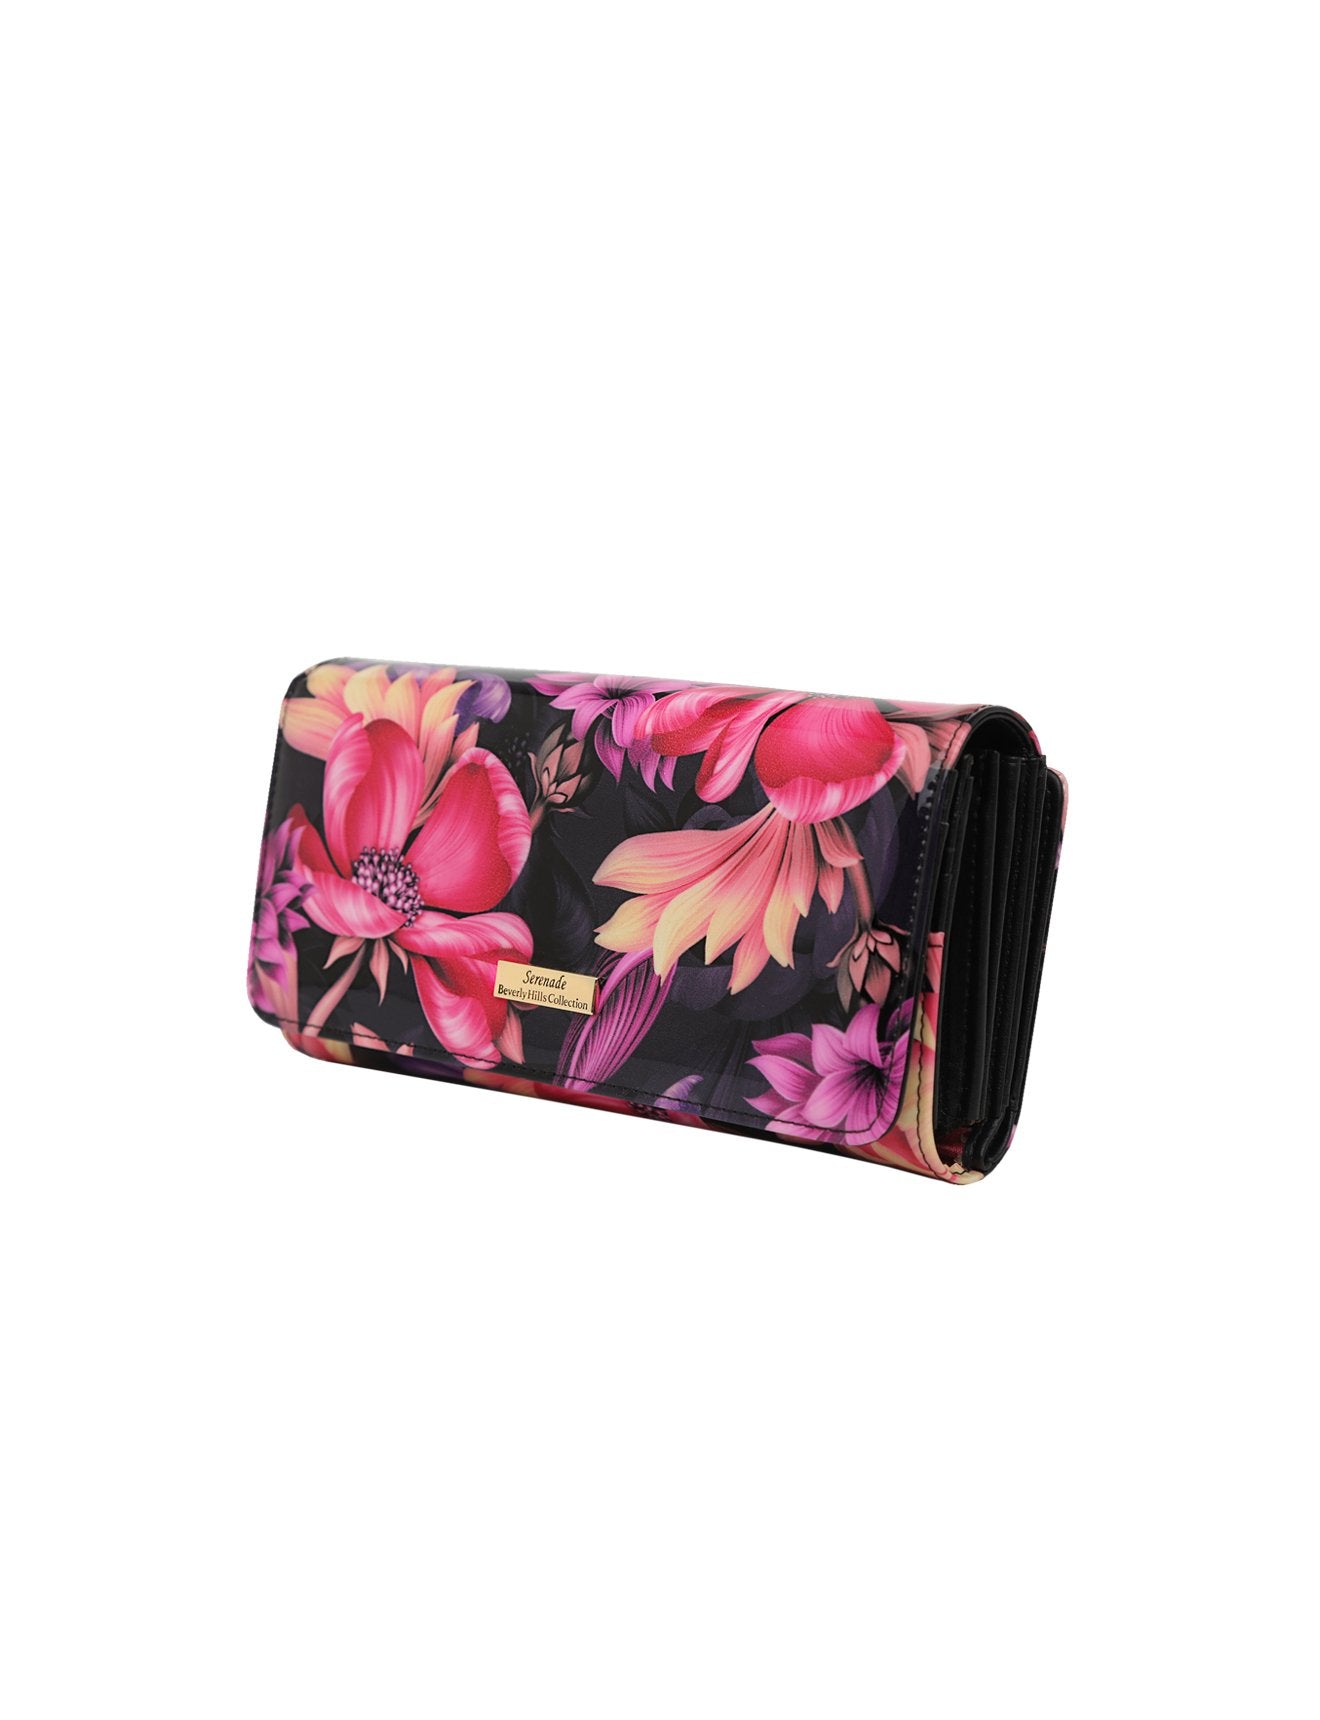 Serenade - Cynthia WSN-2601 RFID Protected Large Leather Wallet - Floral-2